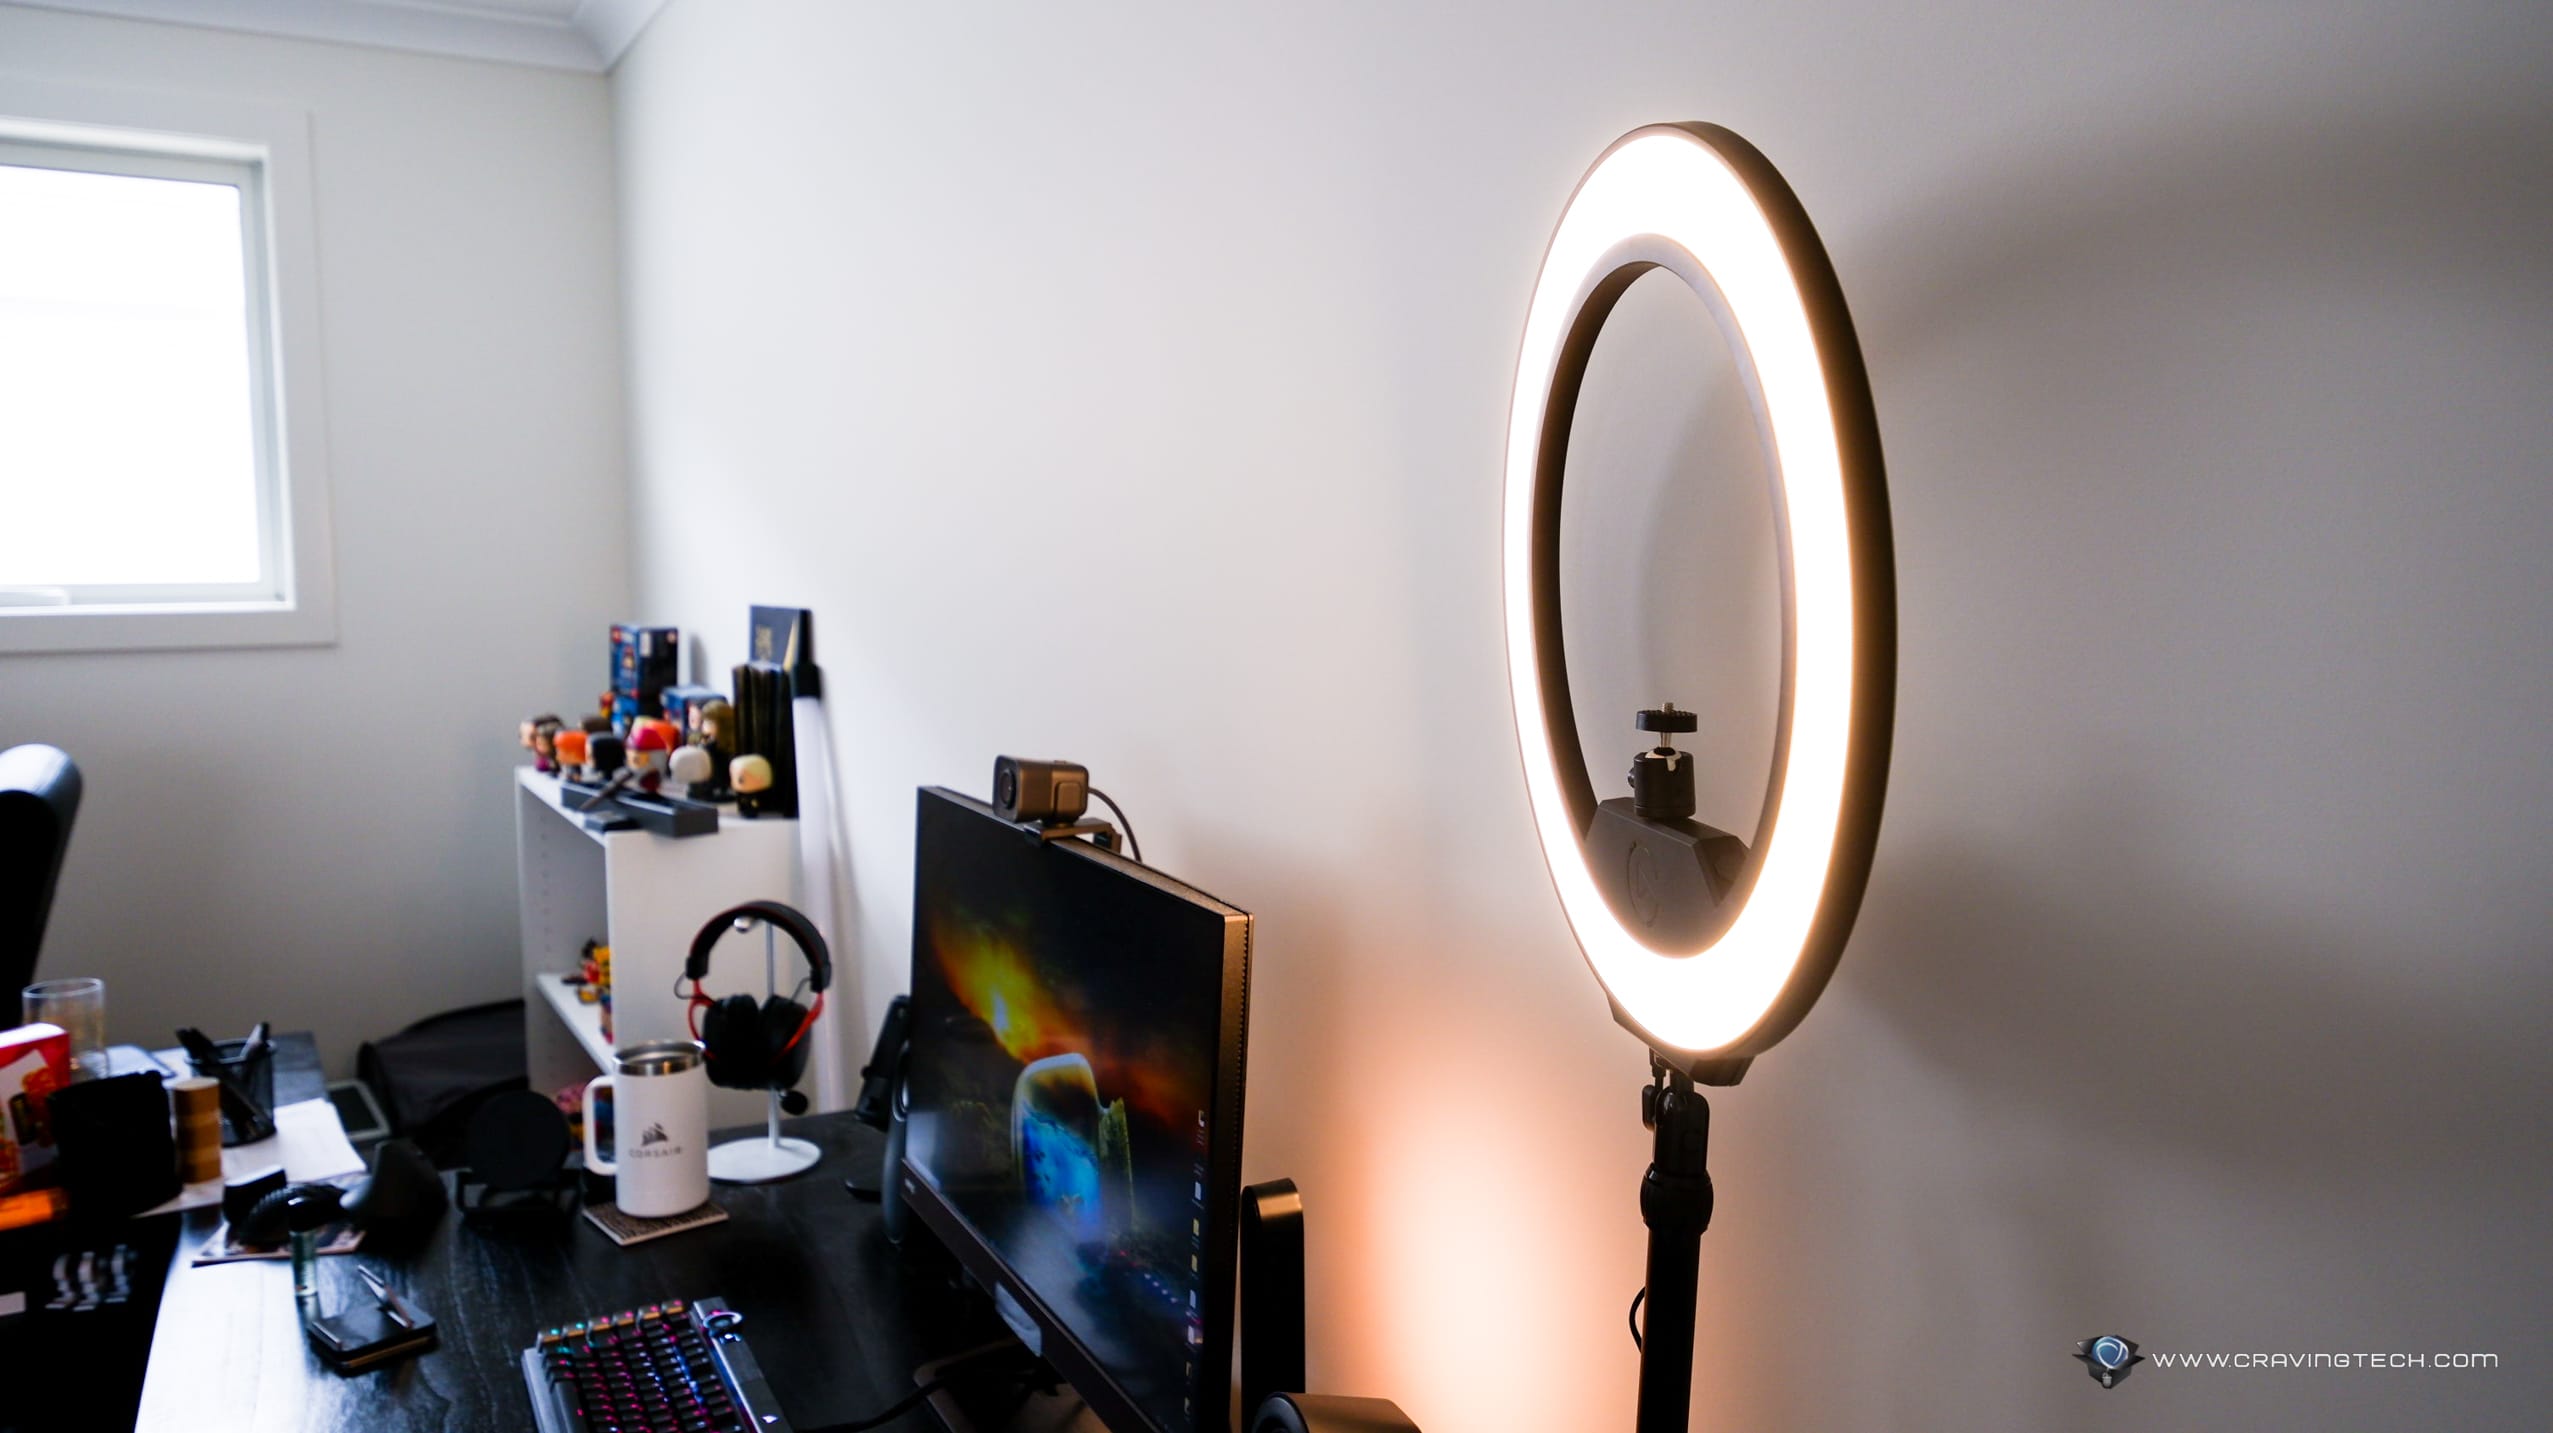 Elgato Ring Light - Premium 2500 lumens Light with desk clamp and ball  mount for Streaming, TikTok, Instagram, Home Office, Temperature and  Brightness